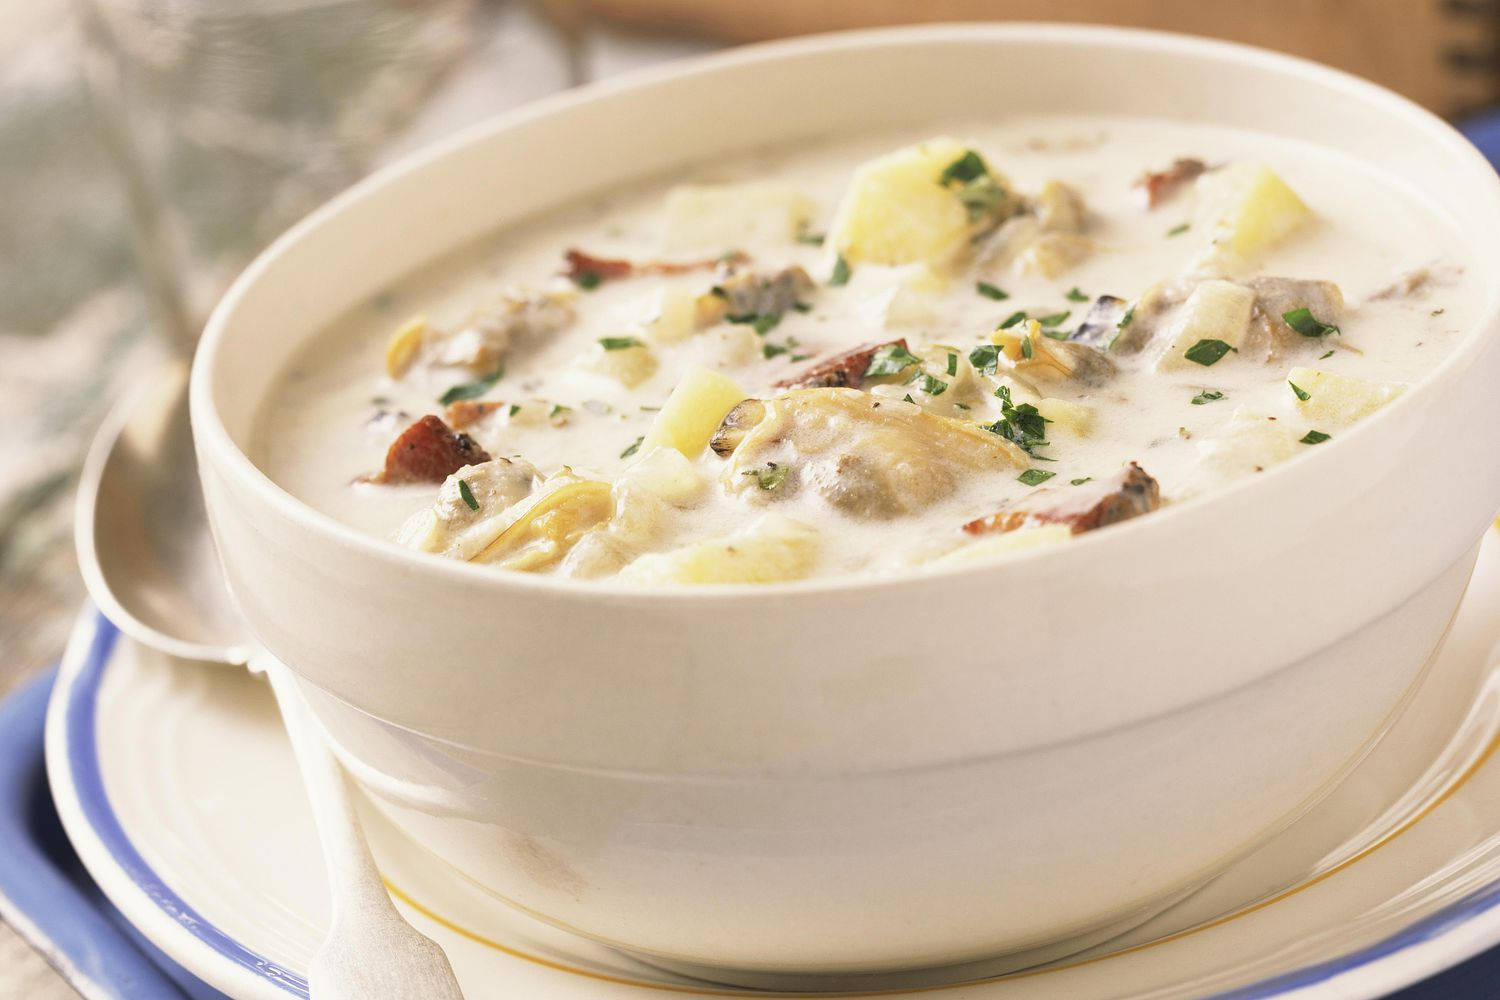 Savory New England Clam Chowder Served in a Bowl Wallpaper